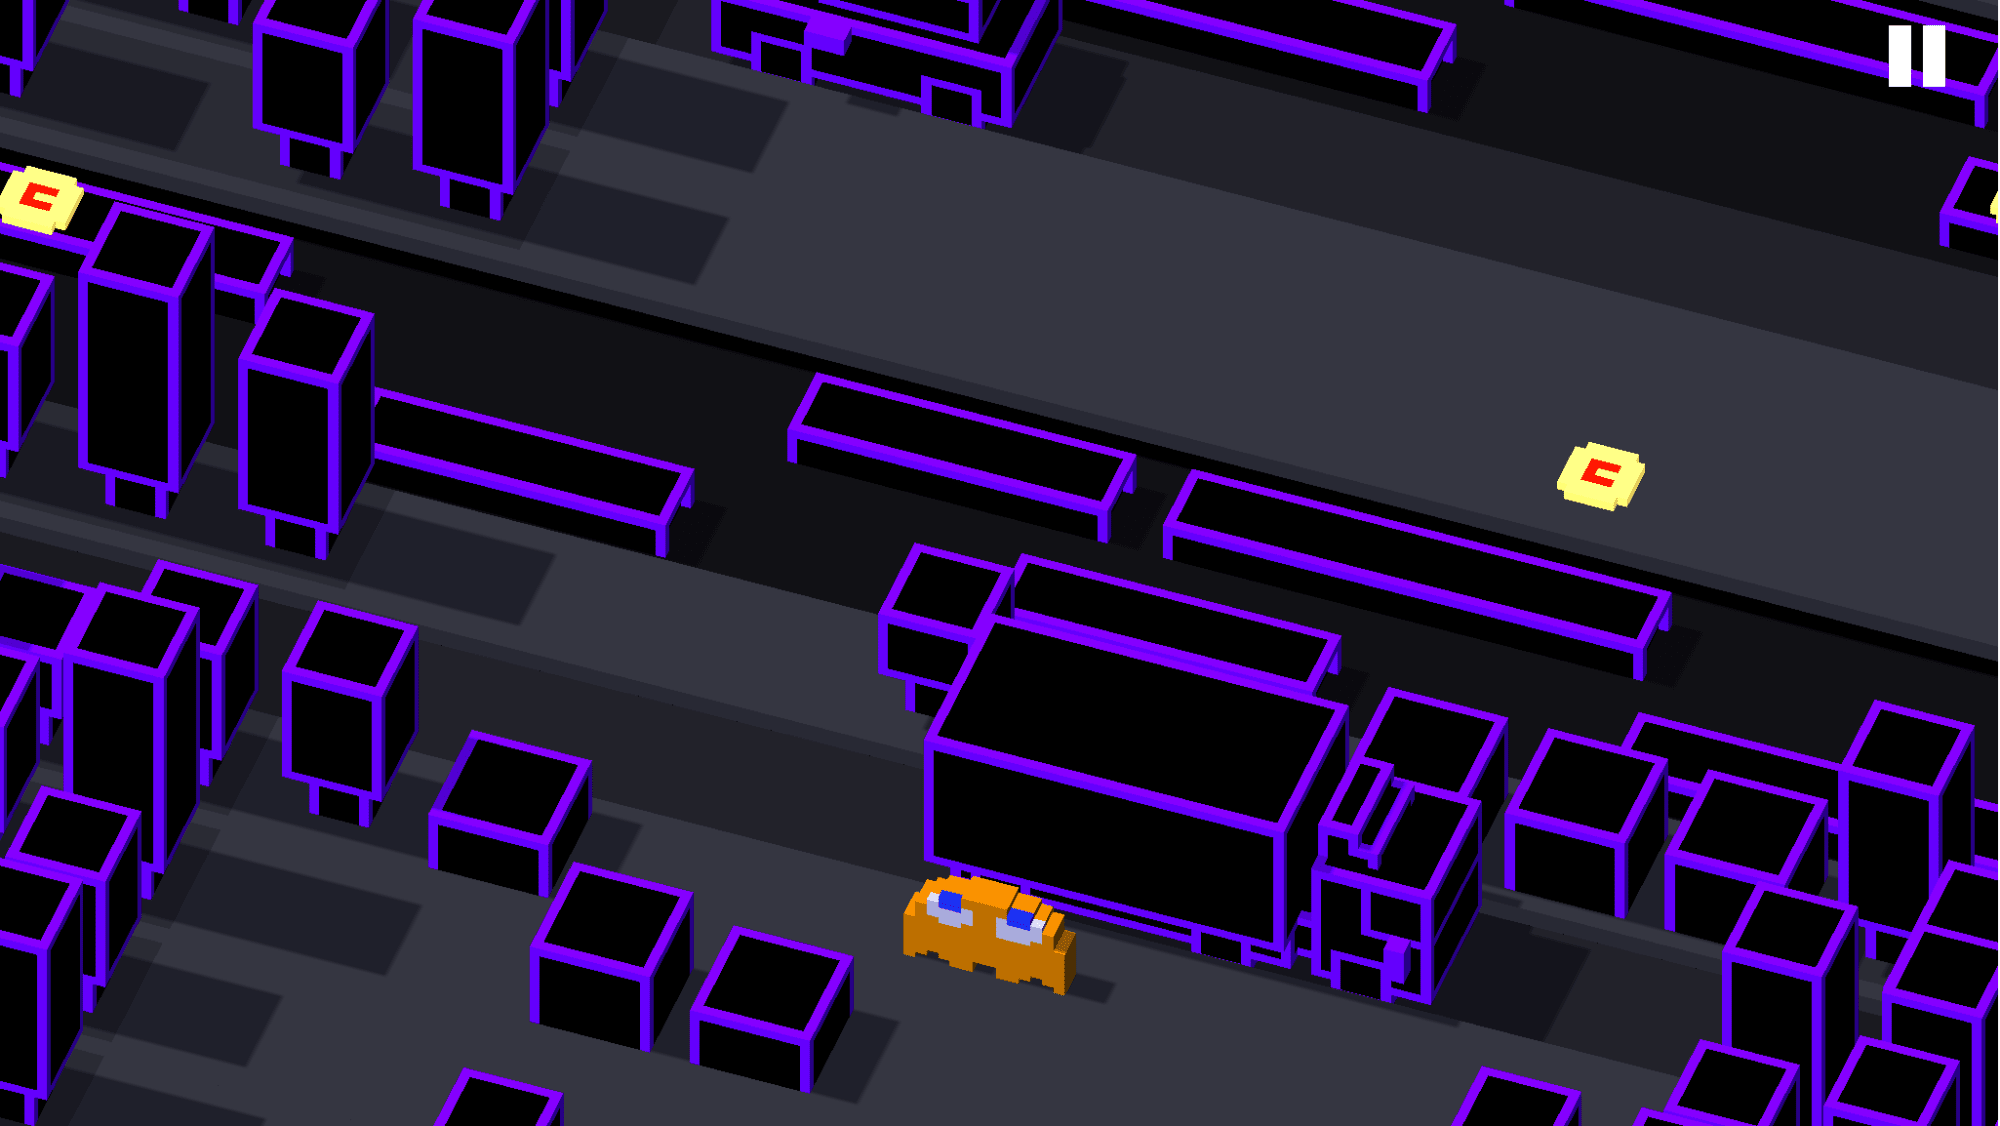 how to get the pac-man ghosts in crossy road